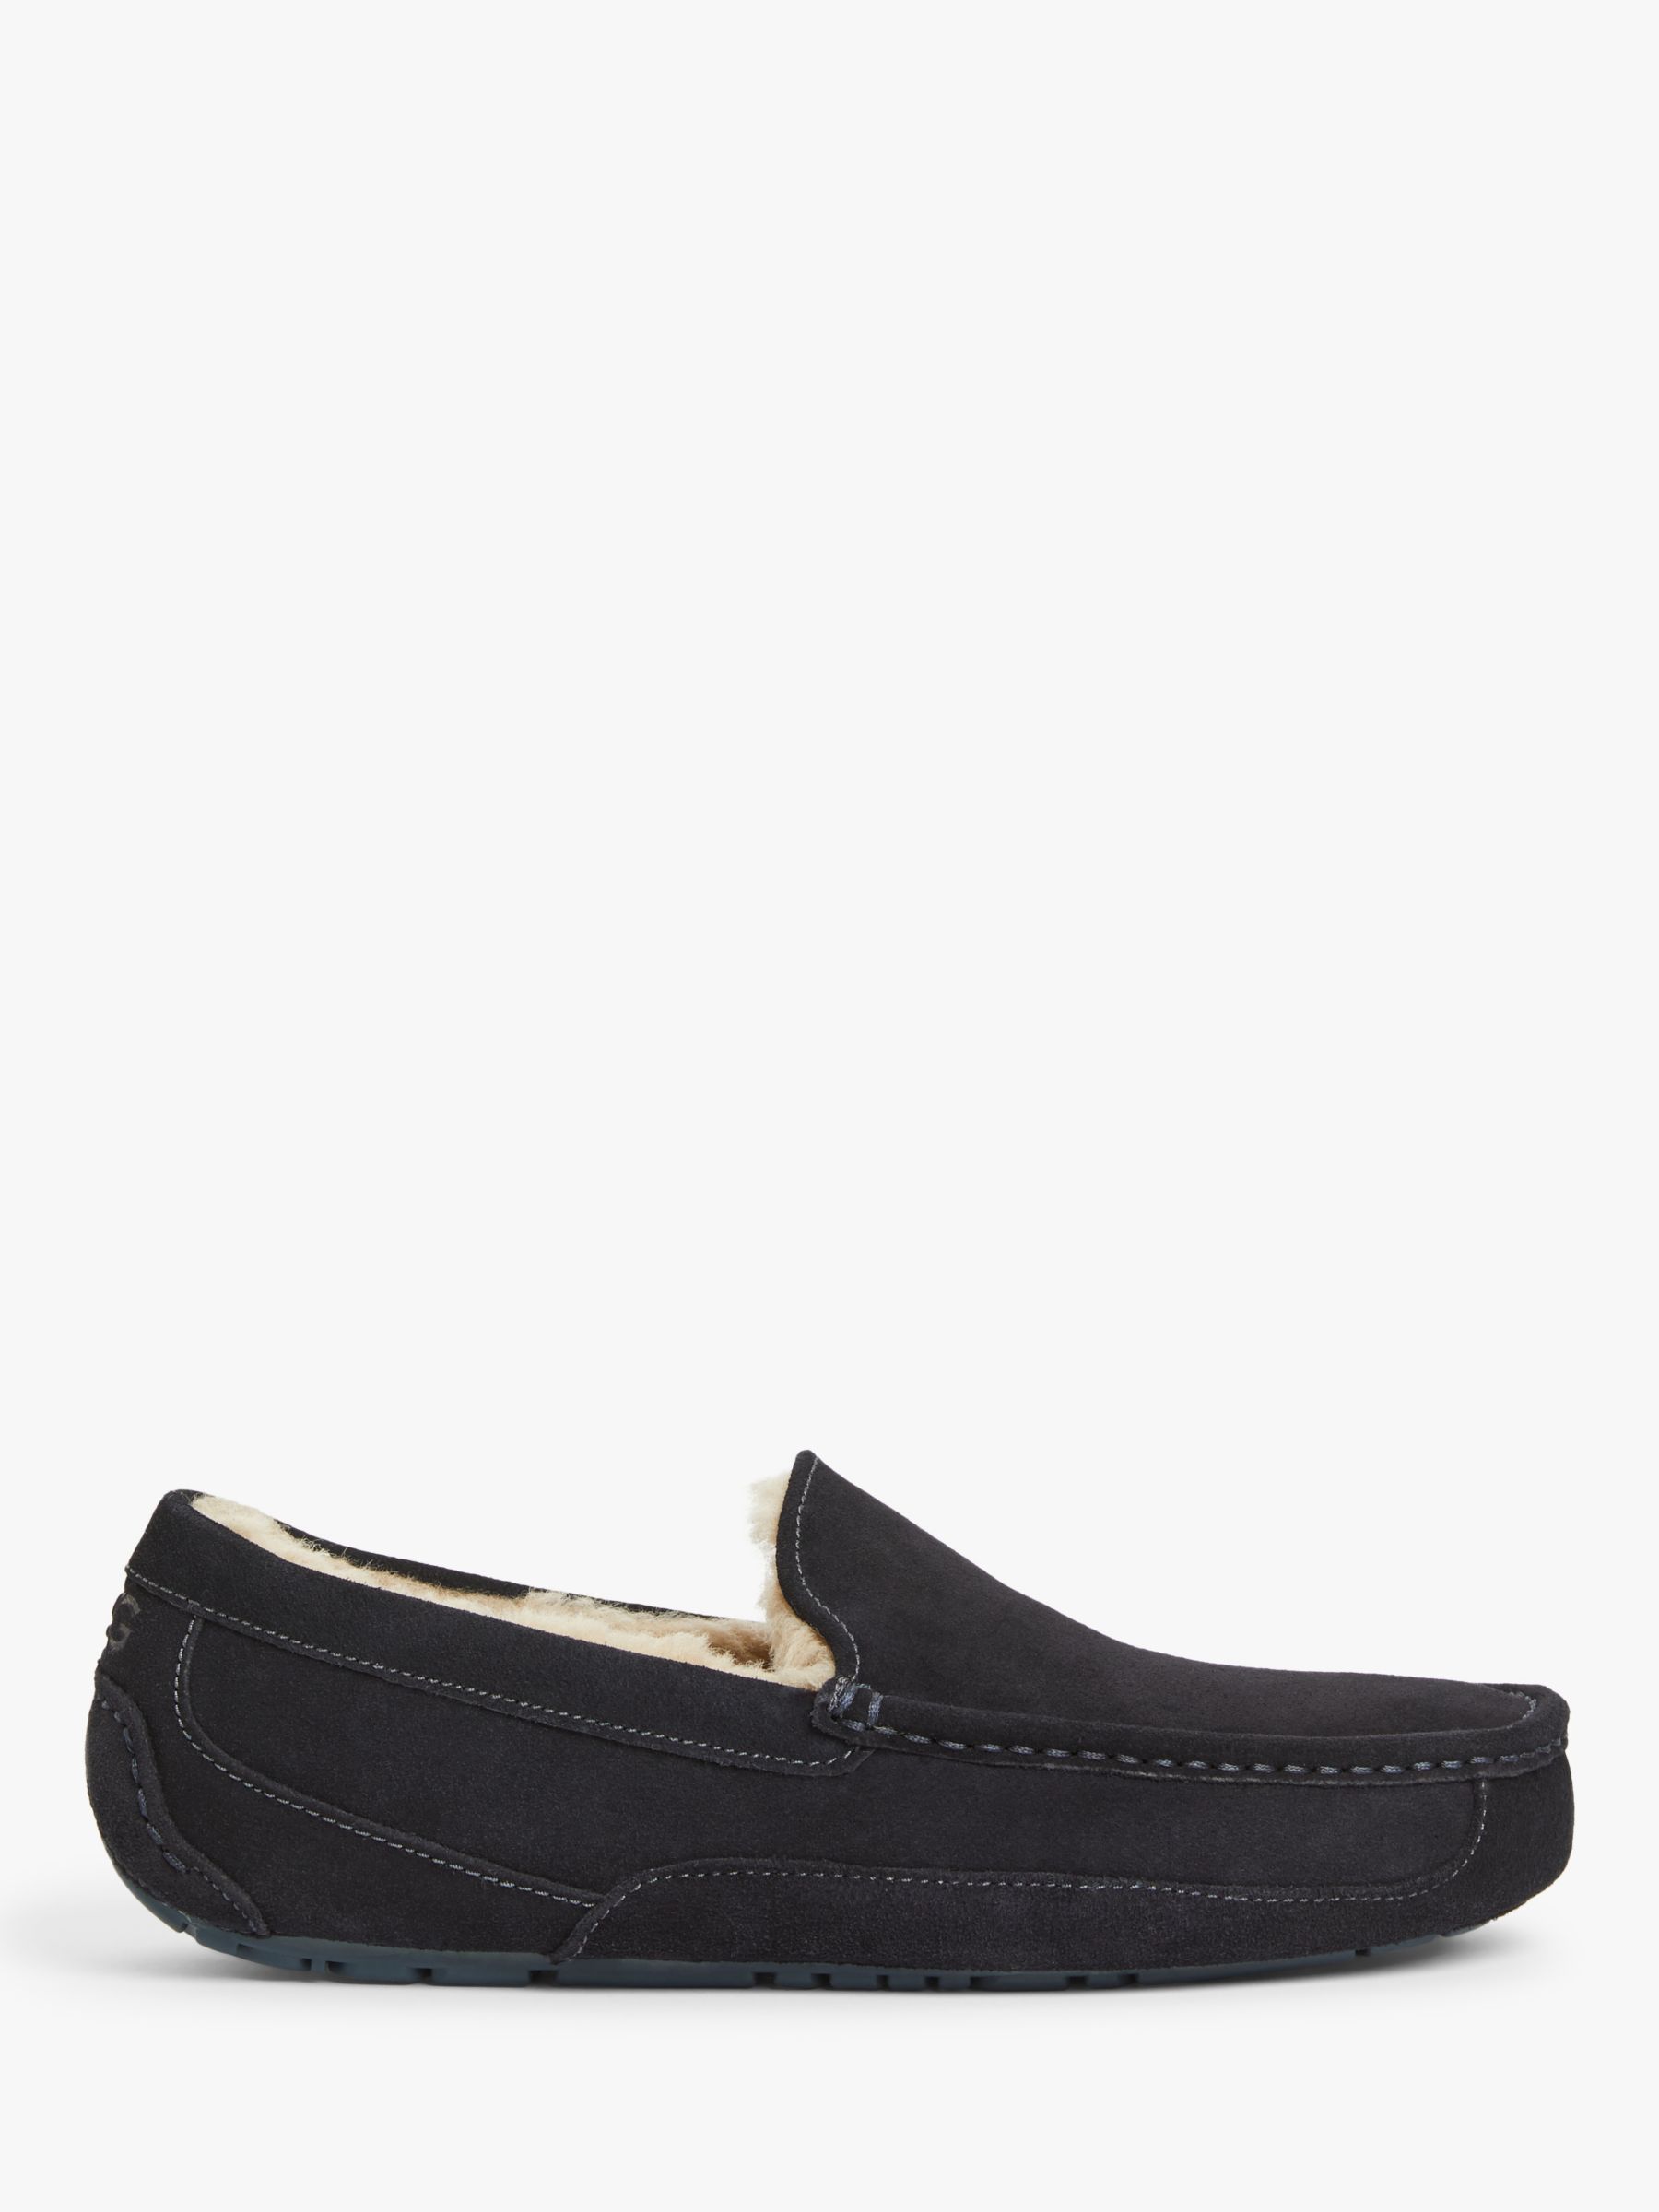 UGG Ascot Moccasin Suede Slippers, Navy, 8